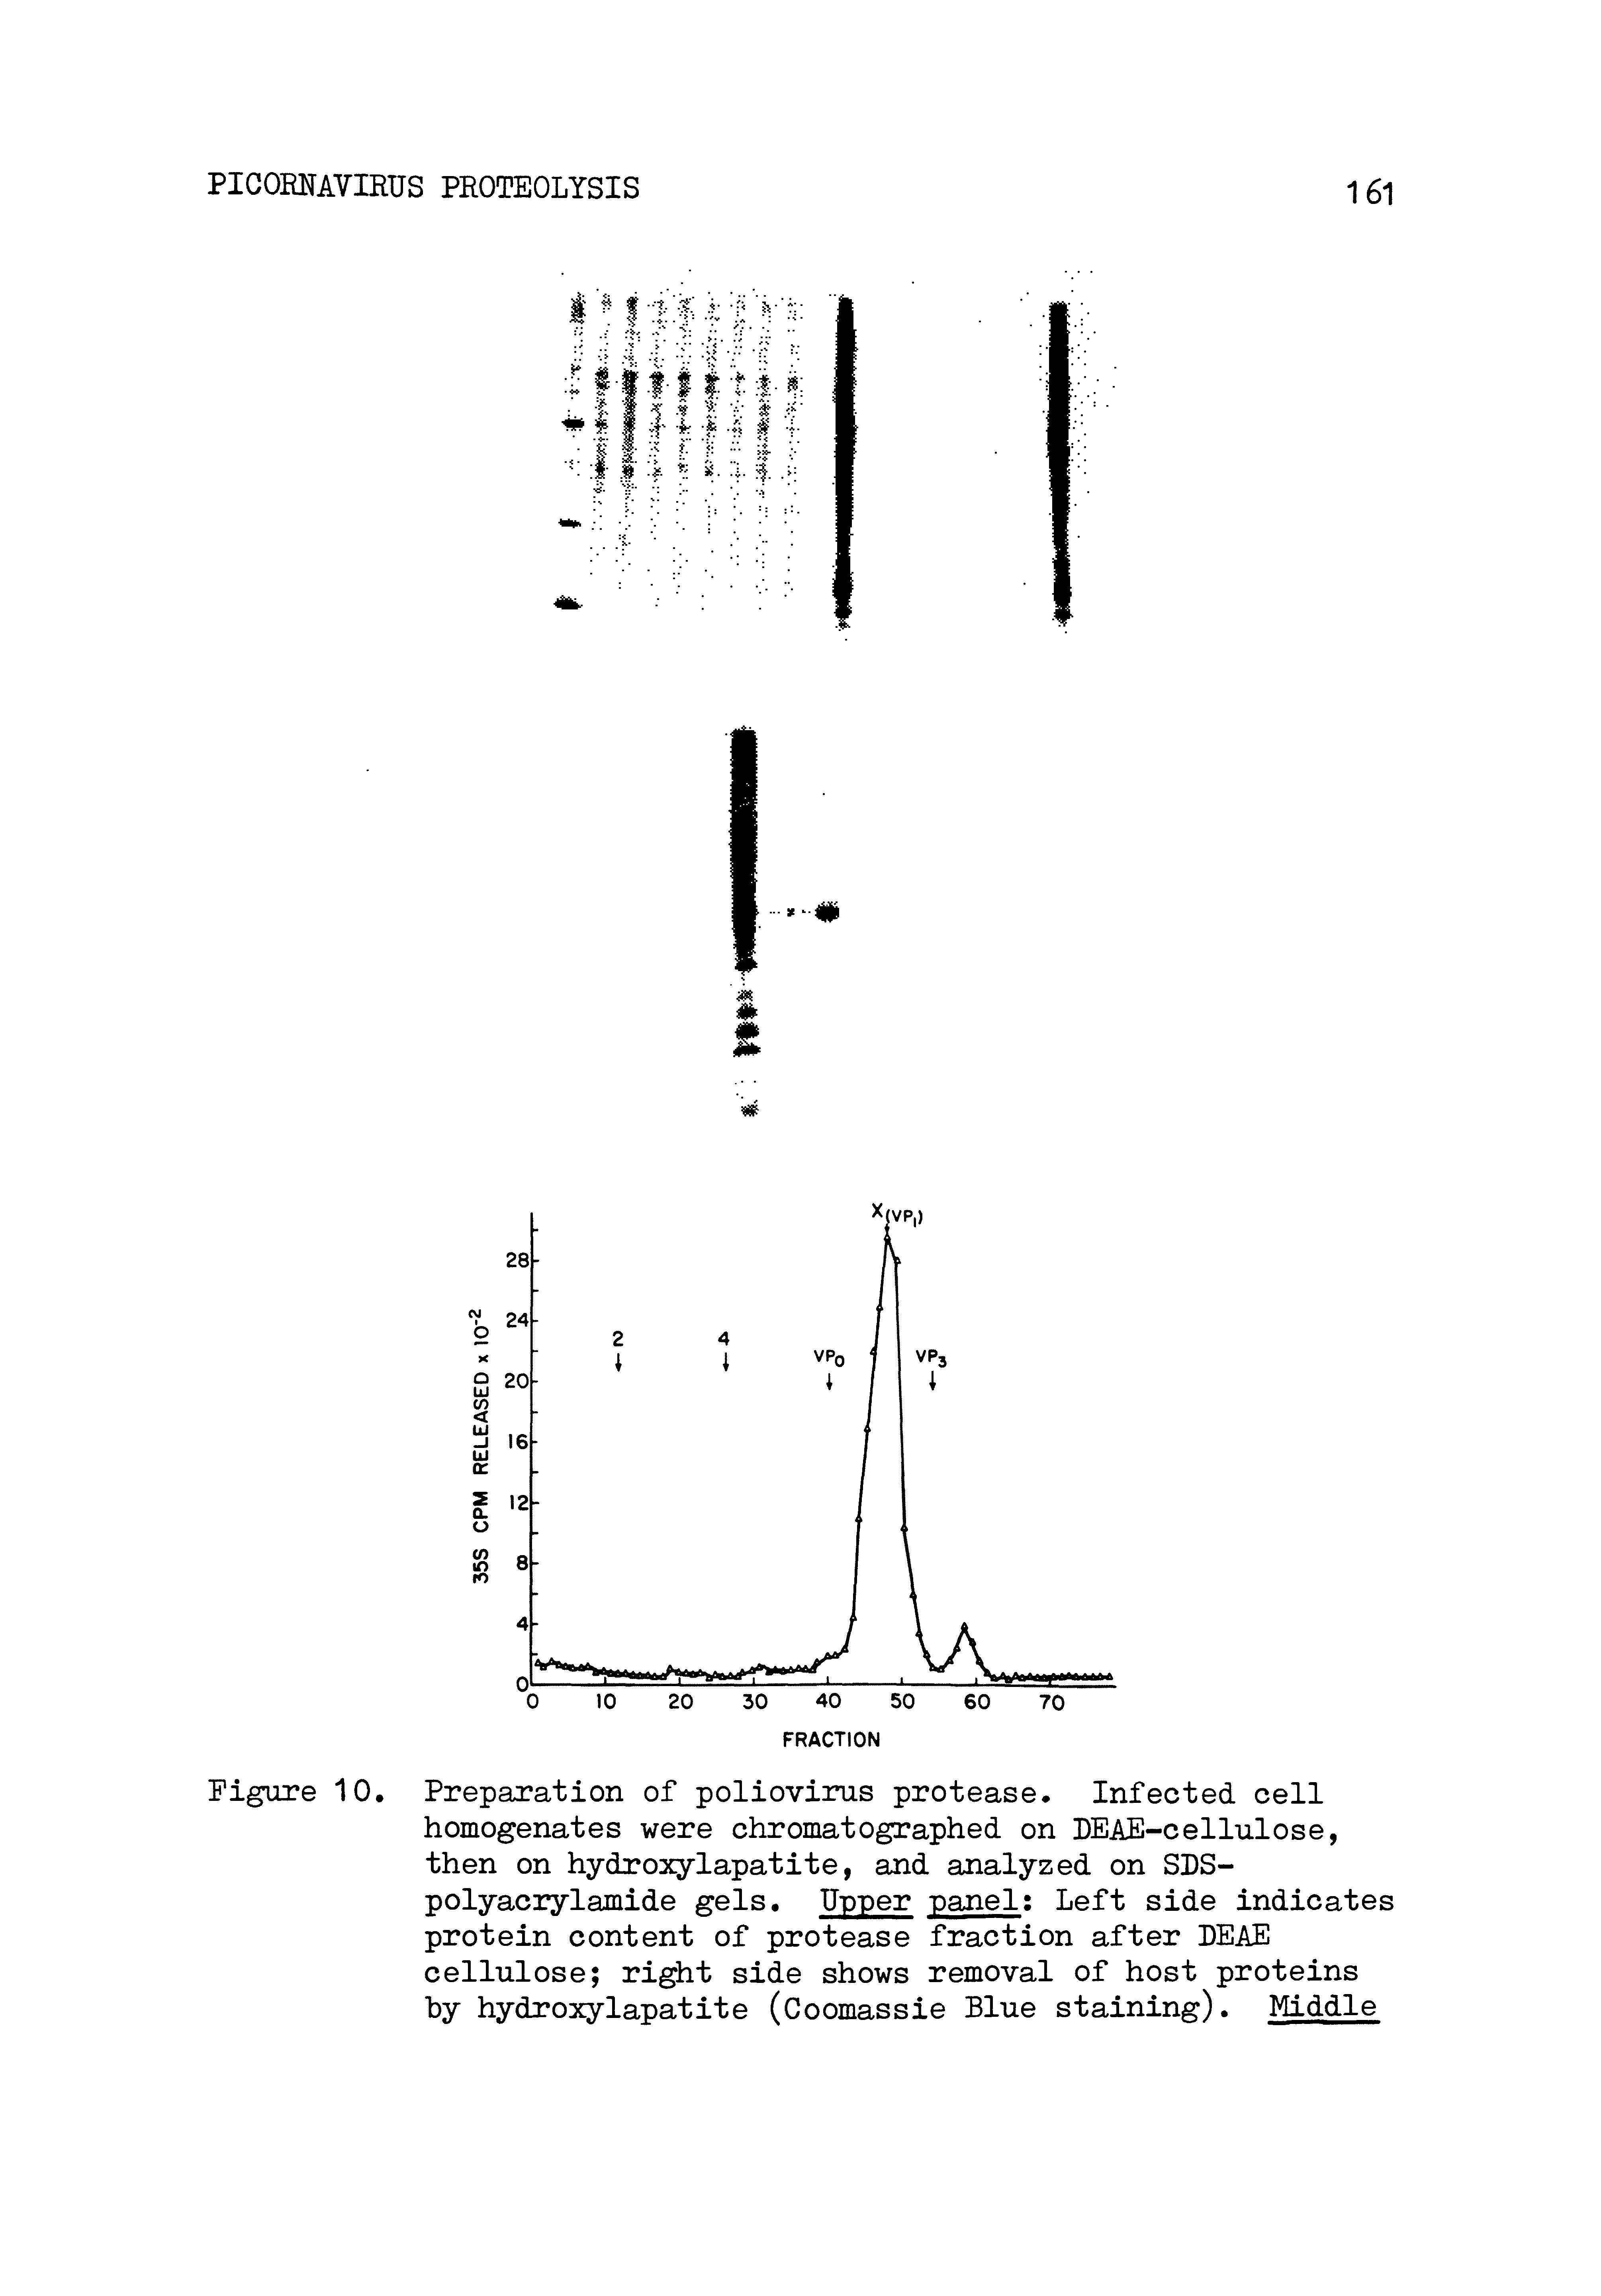 Figure 10, Preparation of poliovirus protease Infected cell homogenates were chromatographed on PEAF-cellulose, then on hydroxylapatite, and analyzed on SPS-polyacrylamide gels. Upper panel Left side indicates protein content of protease fraction after UEAE cellulose right side shows removal of host proteins by hydroxylapatite (Coomassie Blue staining). Middle...